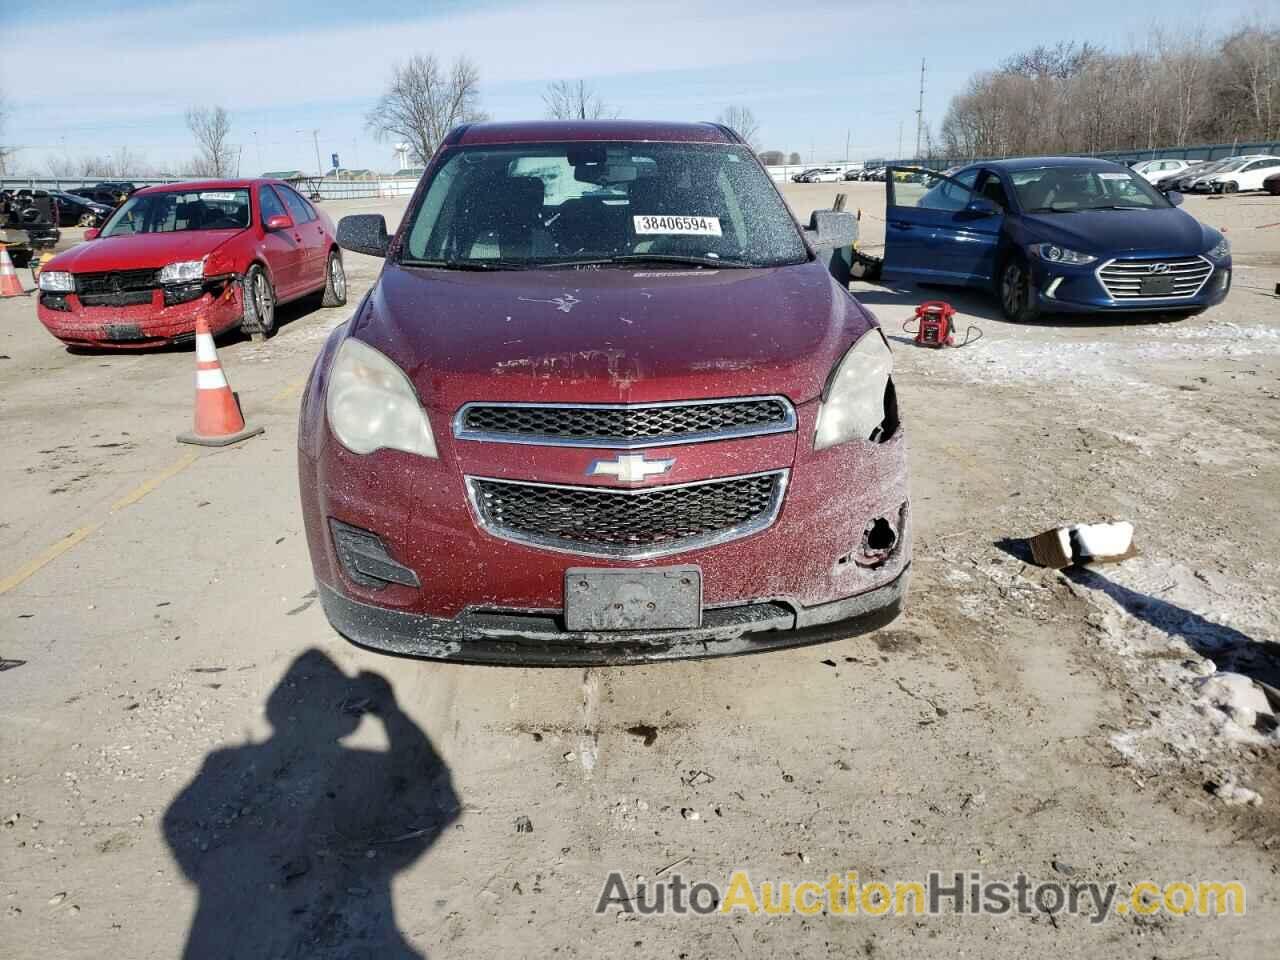 CHEVROLET ALL OTHER LS, 2CNALBEW0A6251674